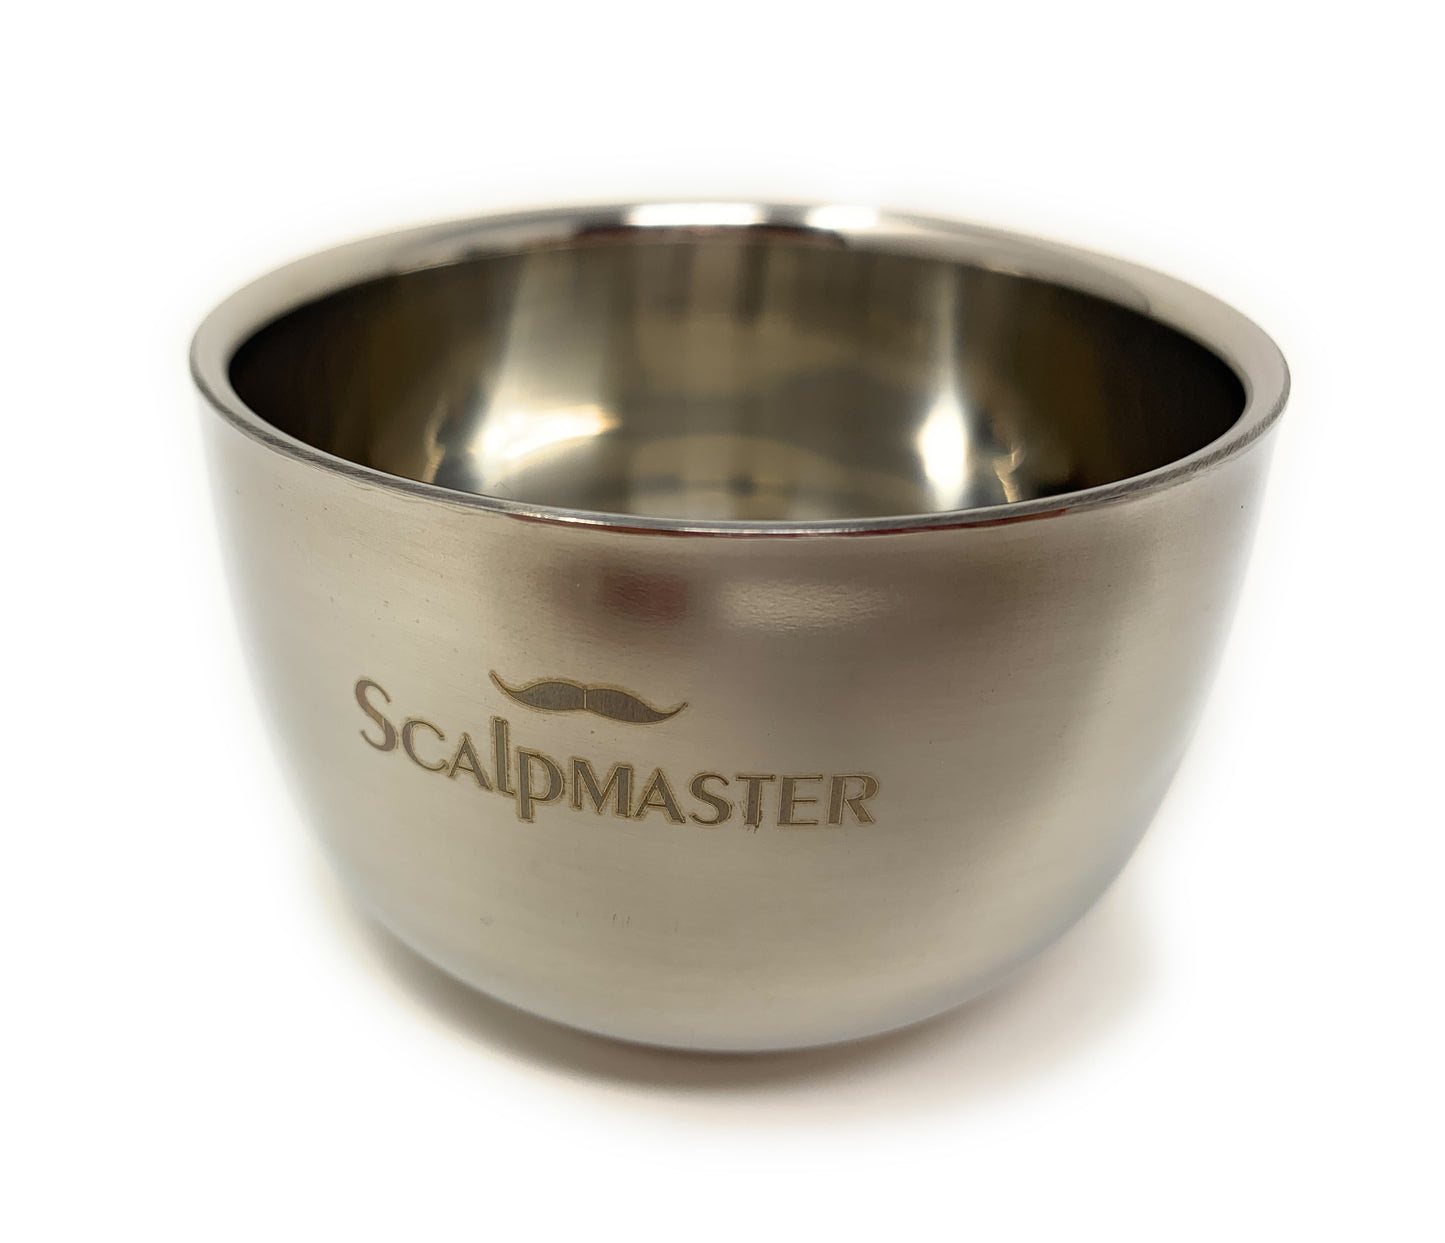 Scalpmaster Stainless Steel Shaving Bowl Shave Accessory for Men Small 3.4 Oz